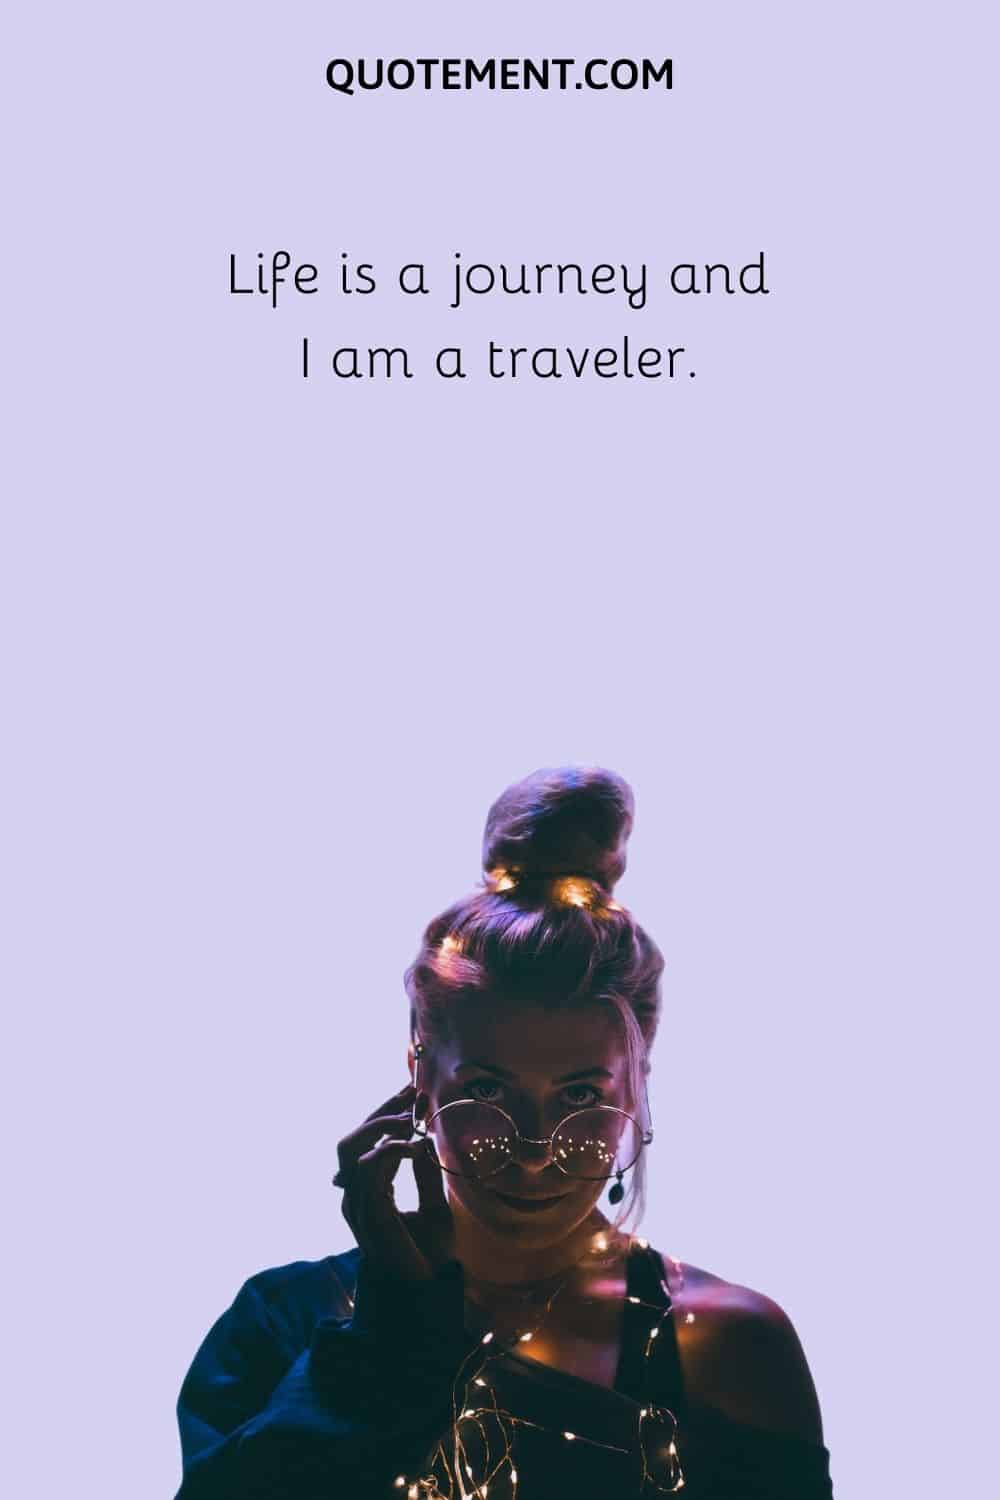 Life is a journey and I am a traveler